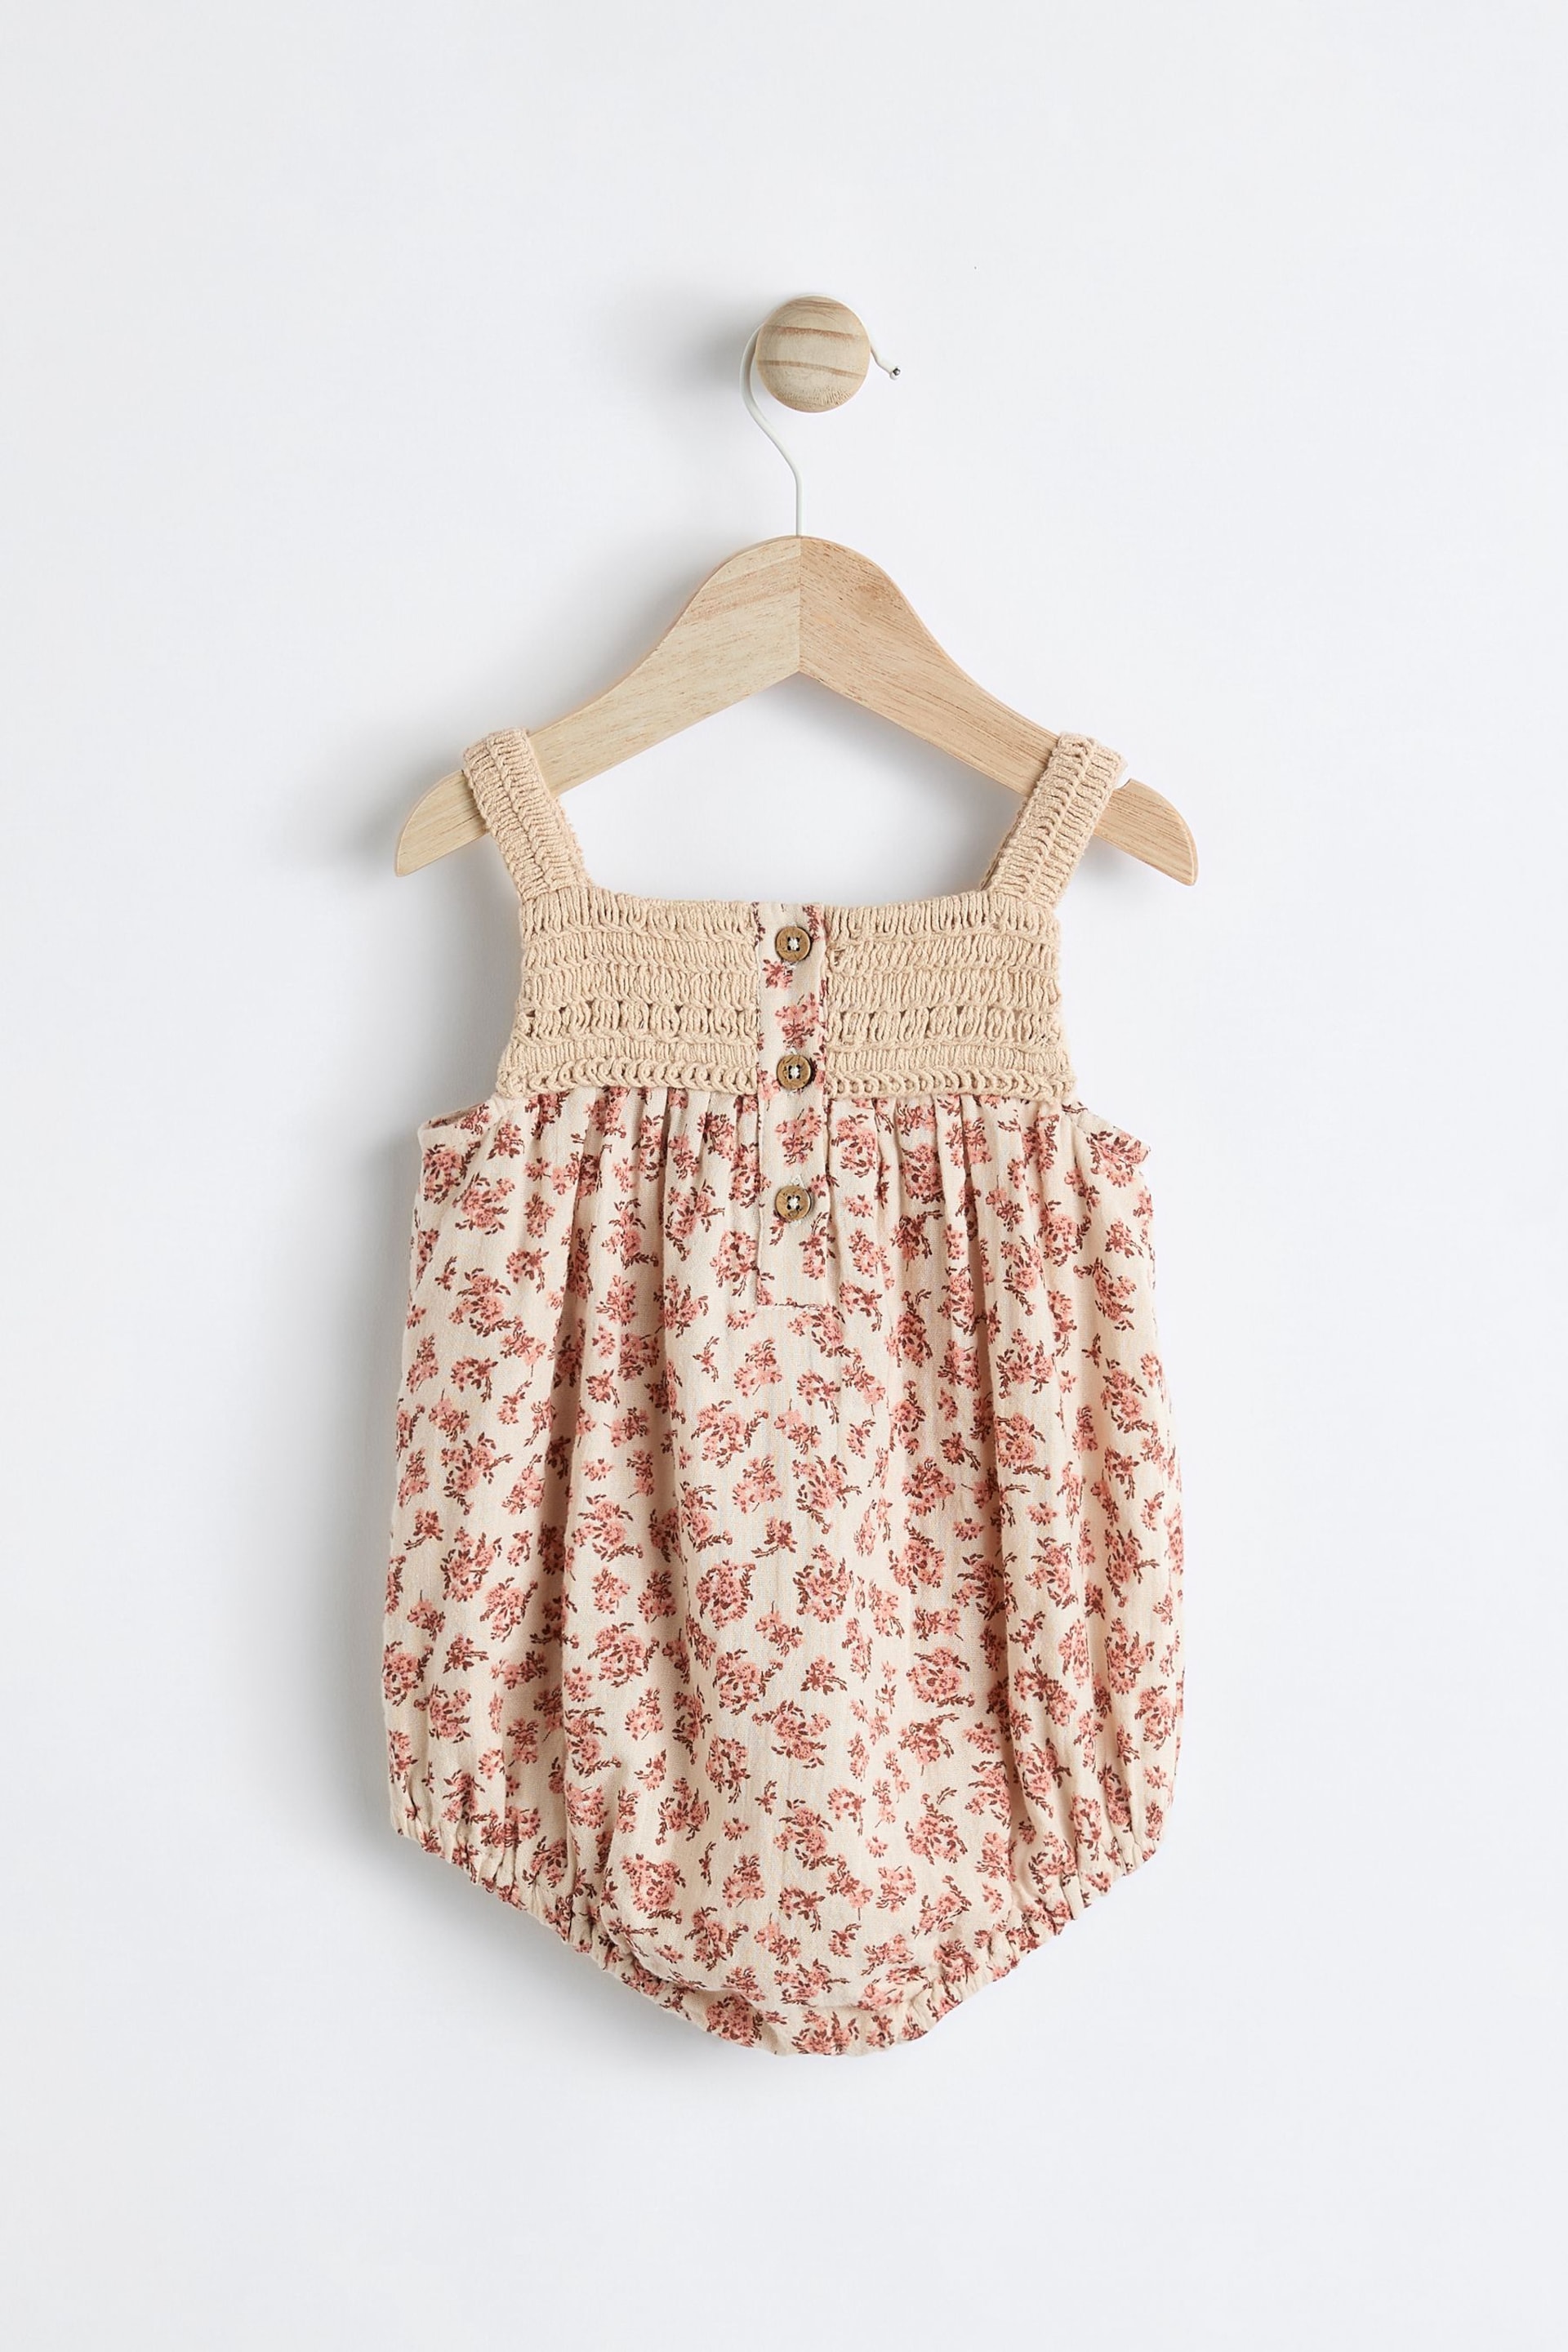 Rust Brown/ Cream Floral Baby Crochet Bloomer Romper (0mths-2yrs) - Image 4 of 8